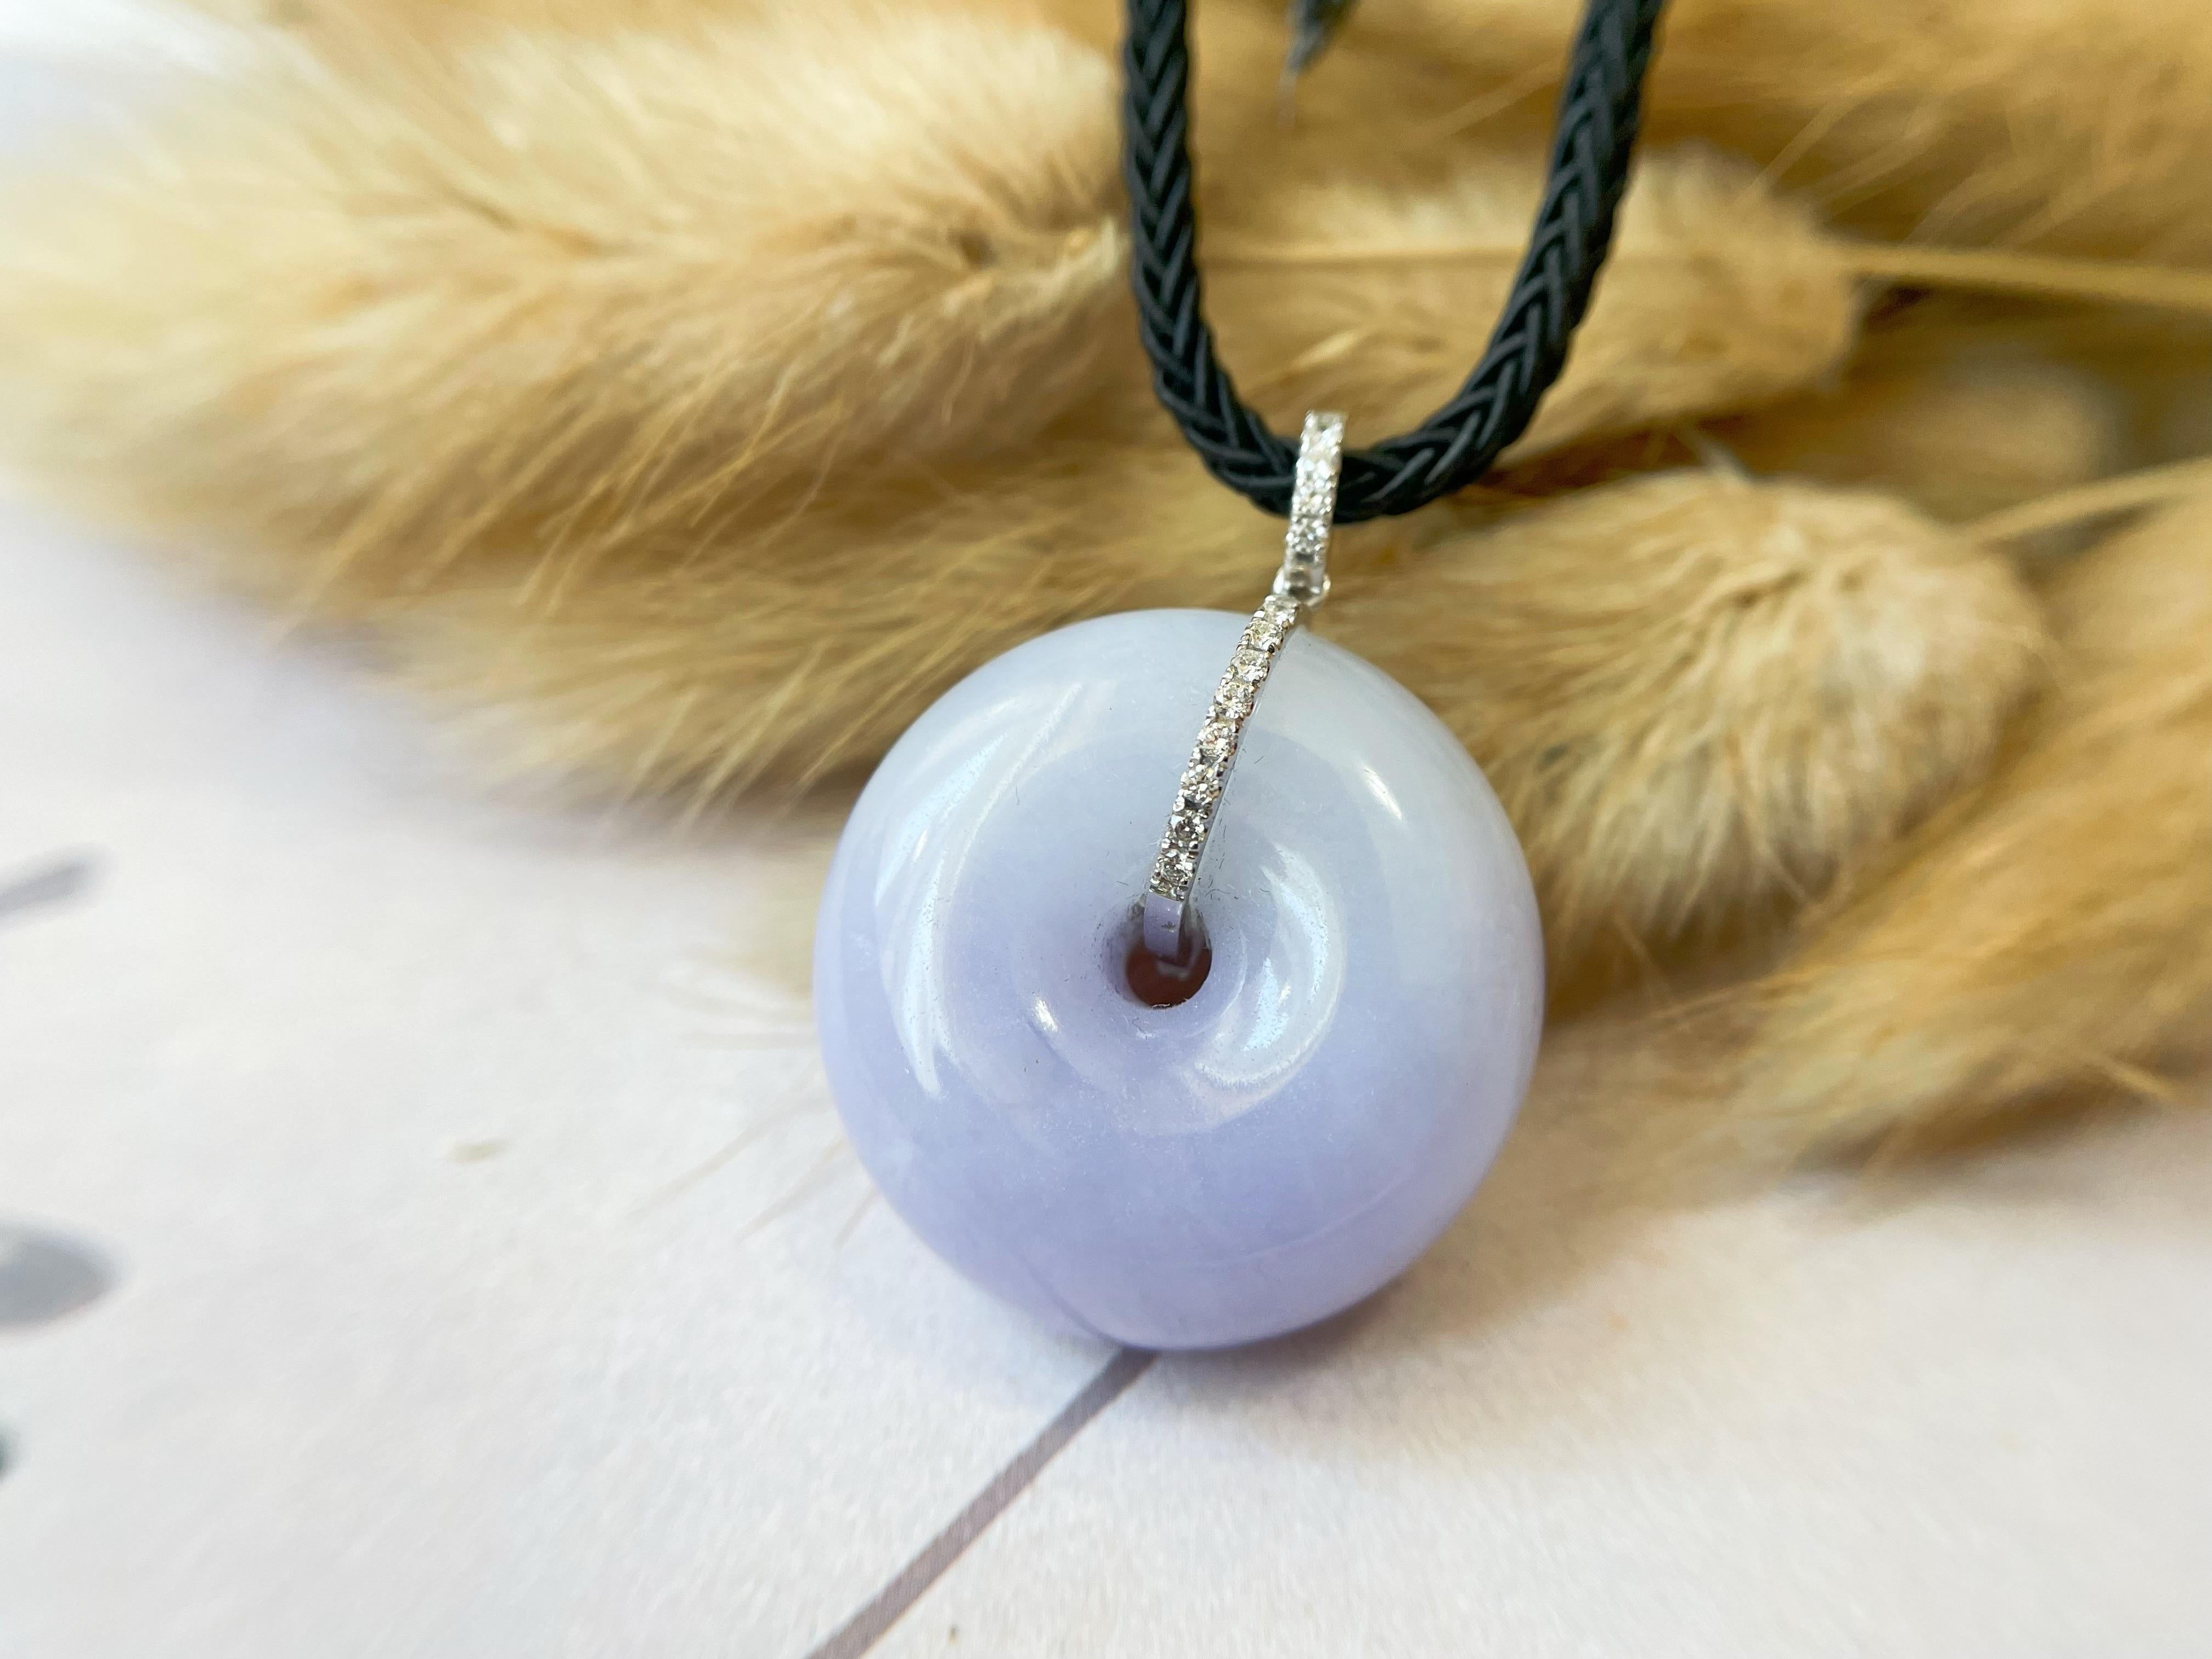 Indulge in the beauty and power of jadeite jade with this exquisite lavender donut jadeite pendant. Made from 100% natural, untreated, and undyed Type-A Myanmar jadeite jade, this pendant features a stunning round shape with a beautiful lavender